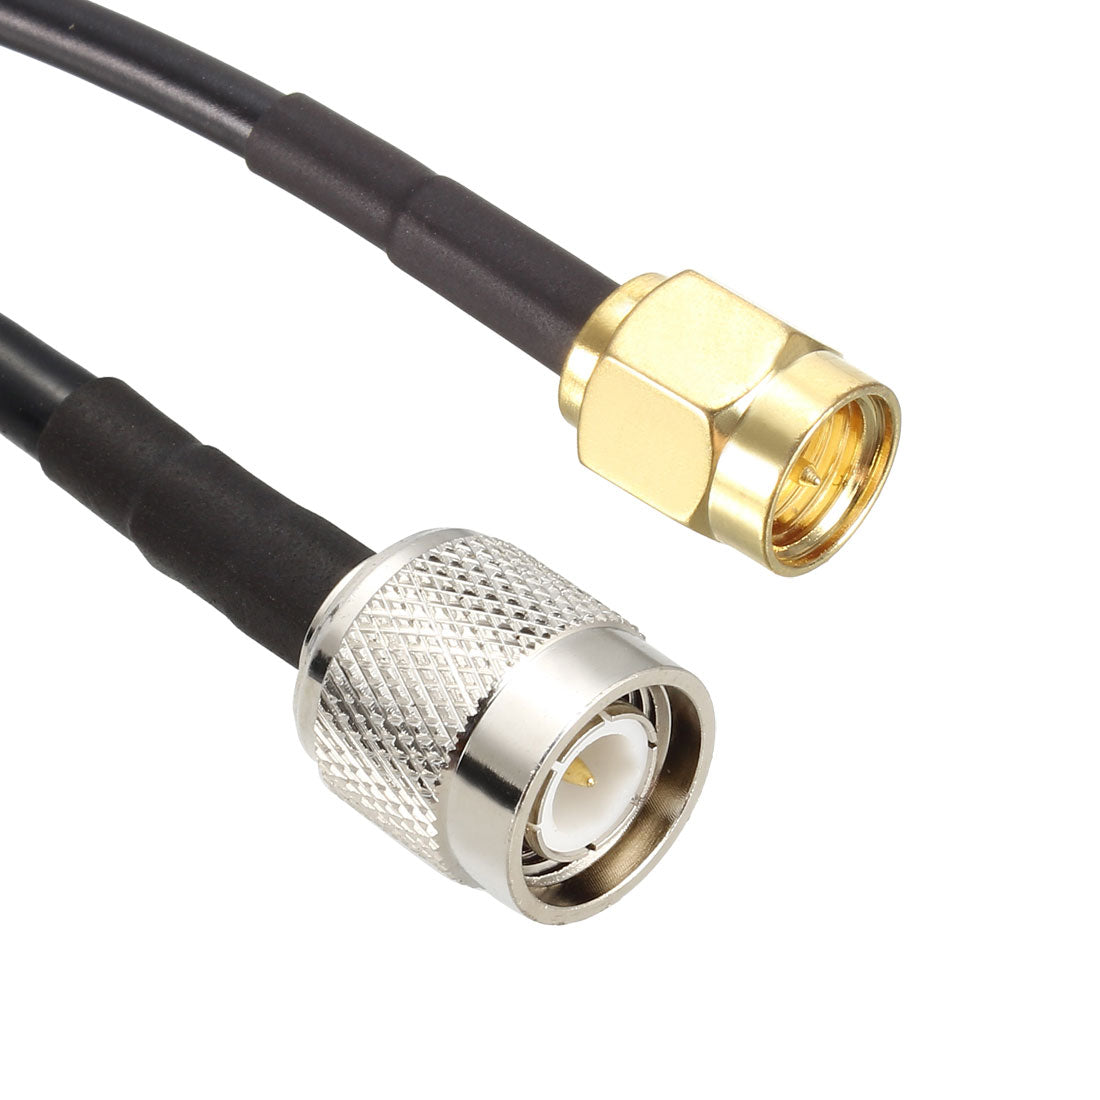 uxcell Uxcell SMA Male to TNC Male RG58 RF Coaxial Cable 50 Ft